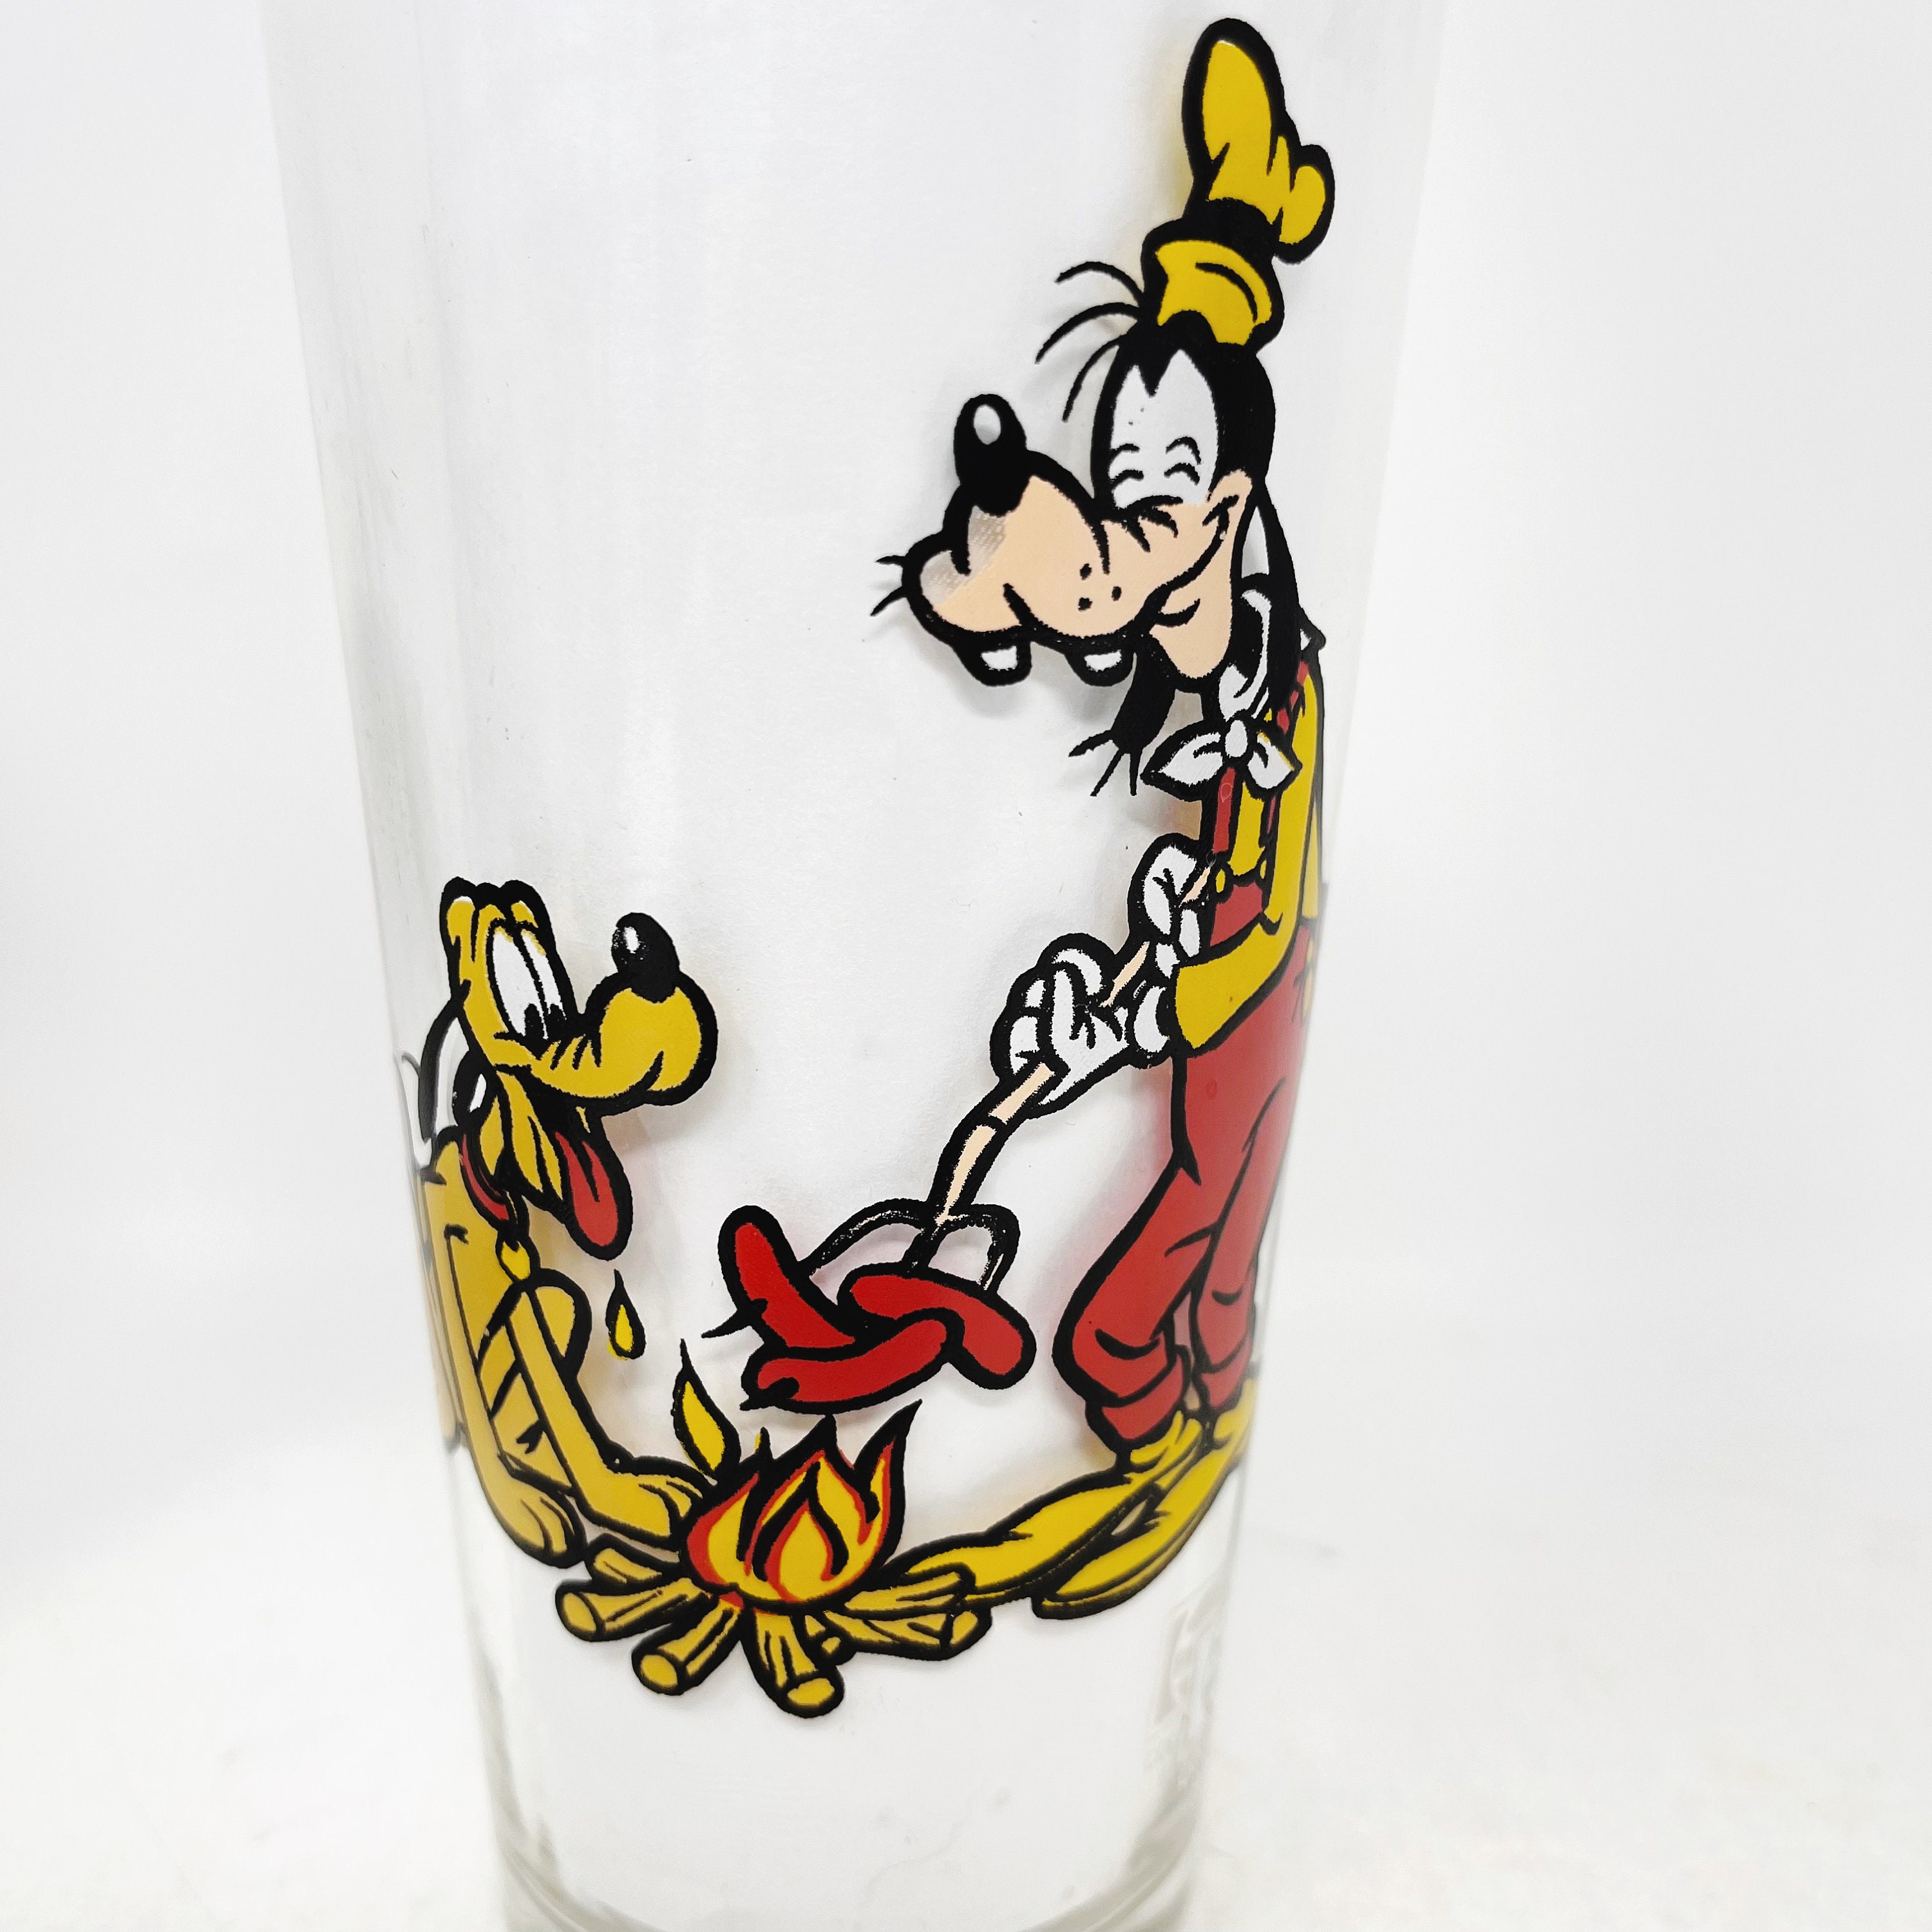 Vintage Disney Drinking Glasses Set of 8- Mickey Minnie and Donald Duck